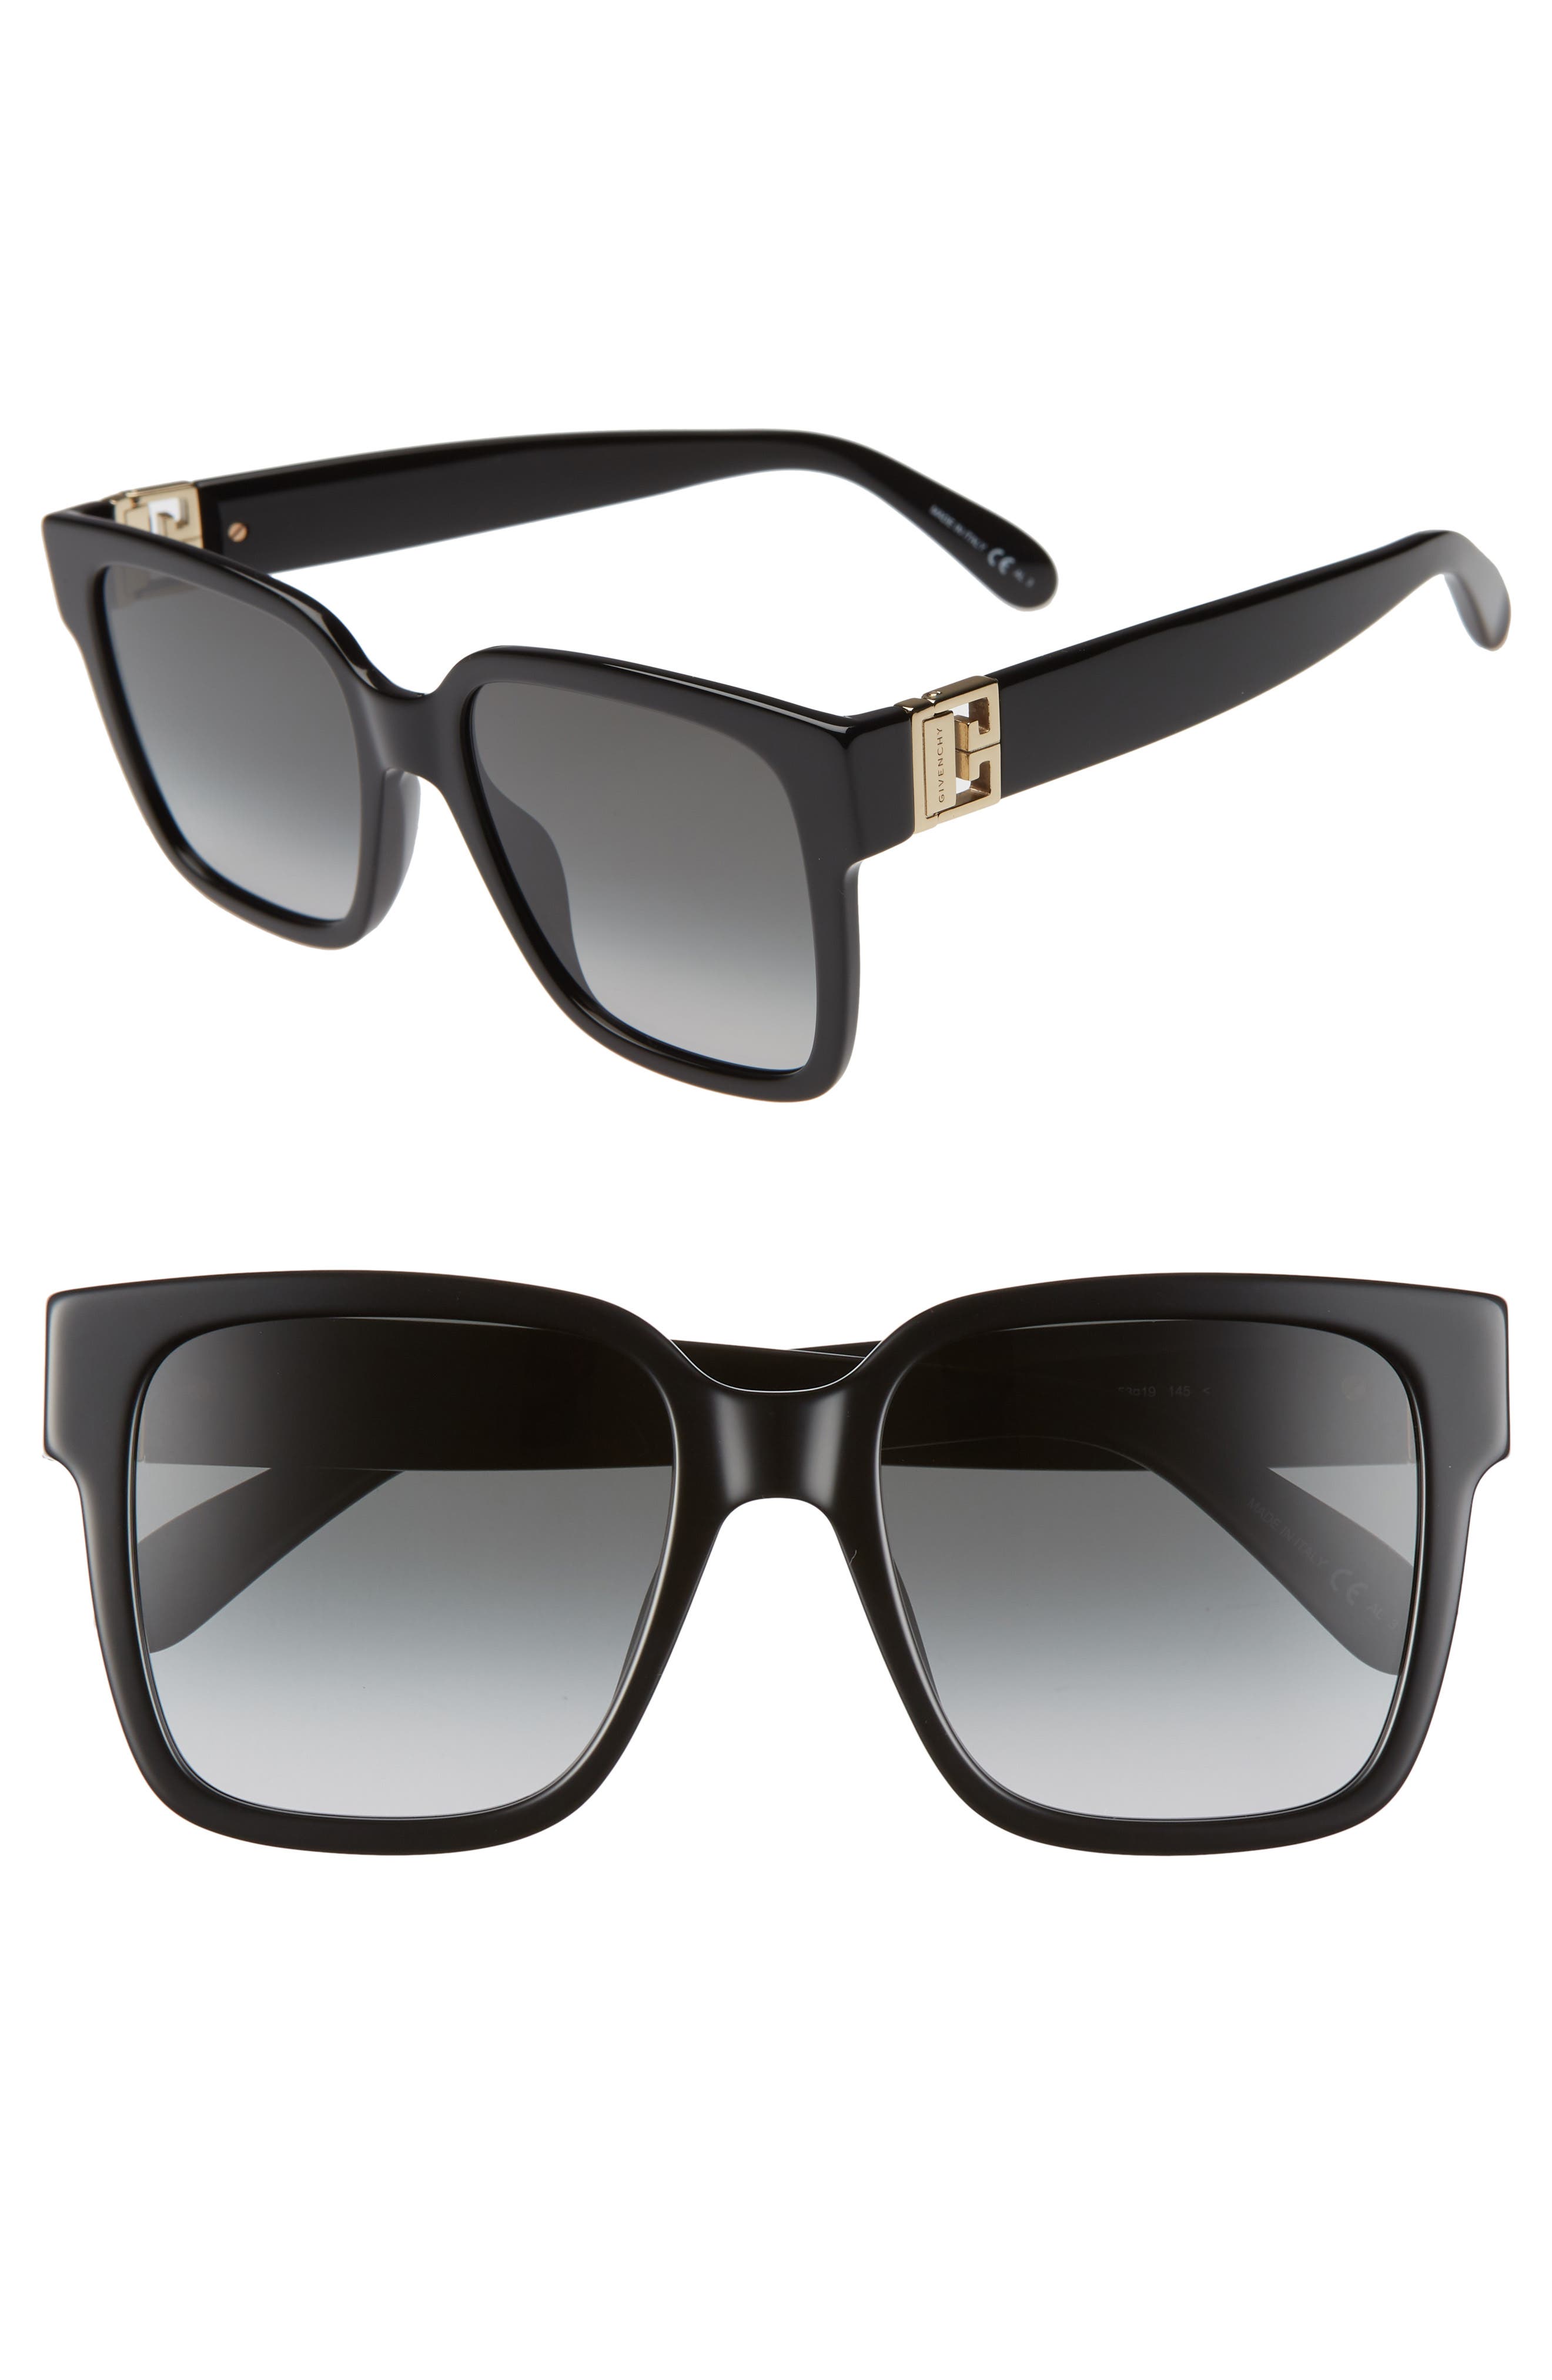 givenchy glasses womens